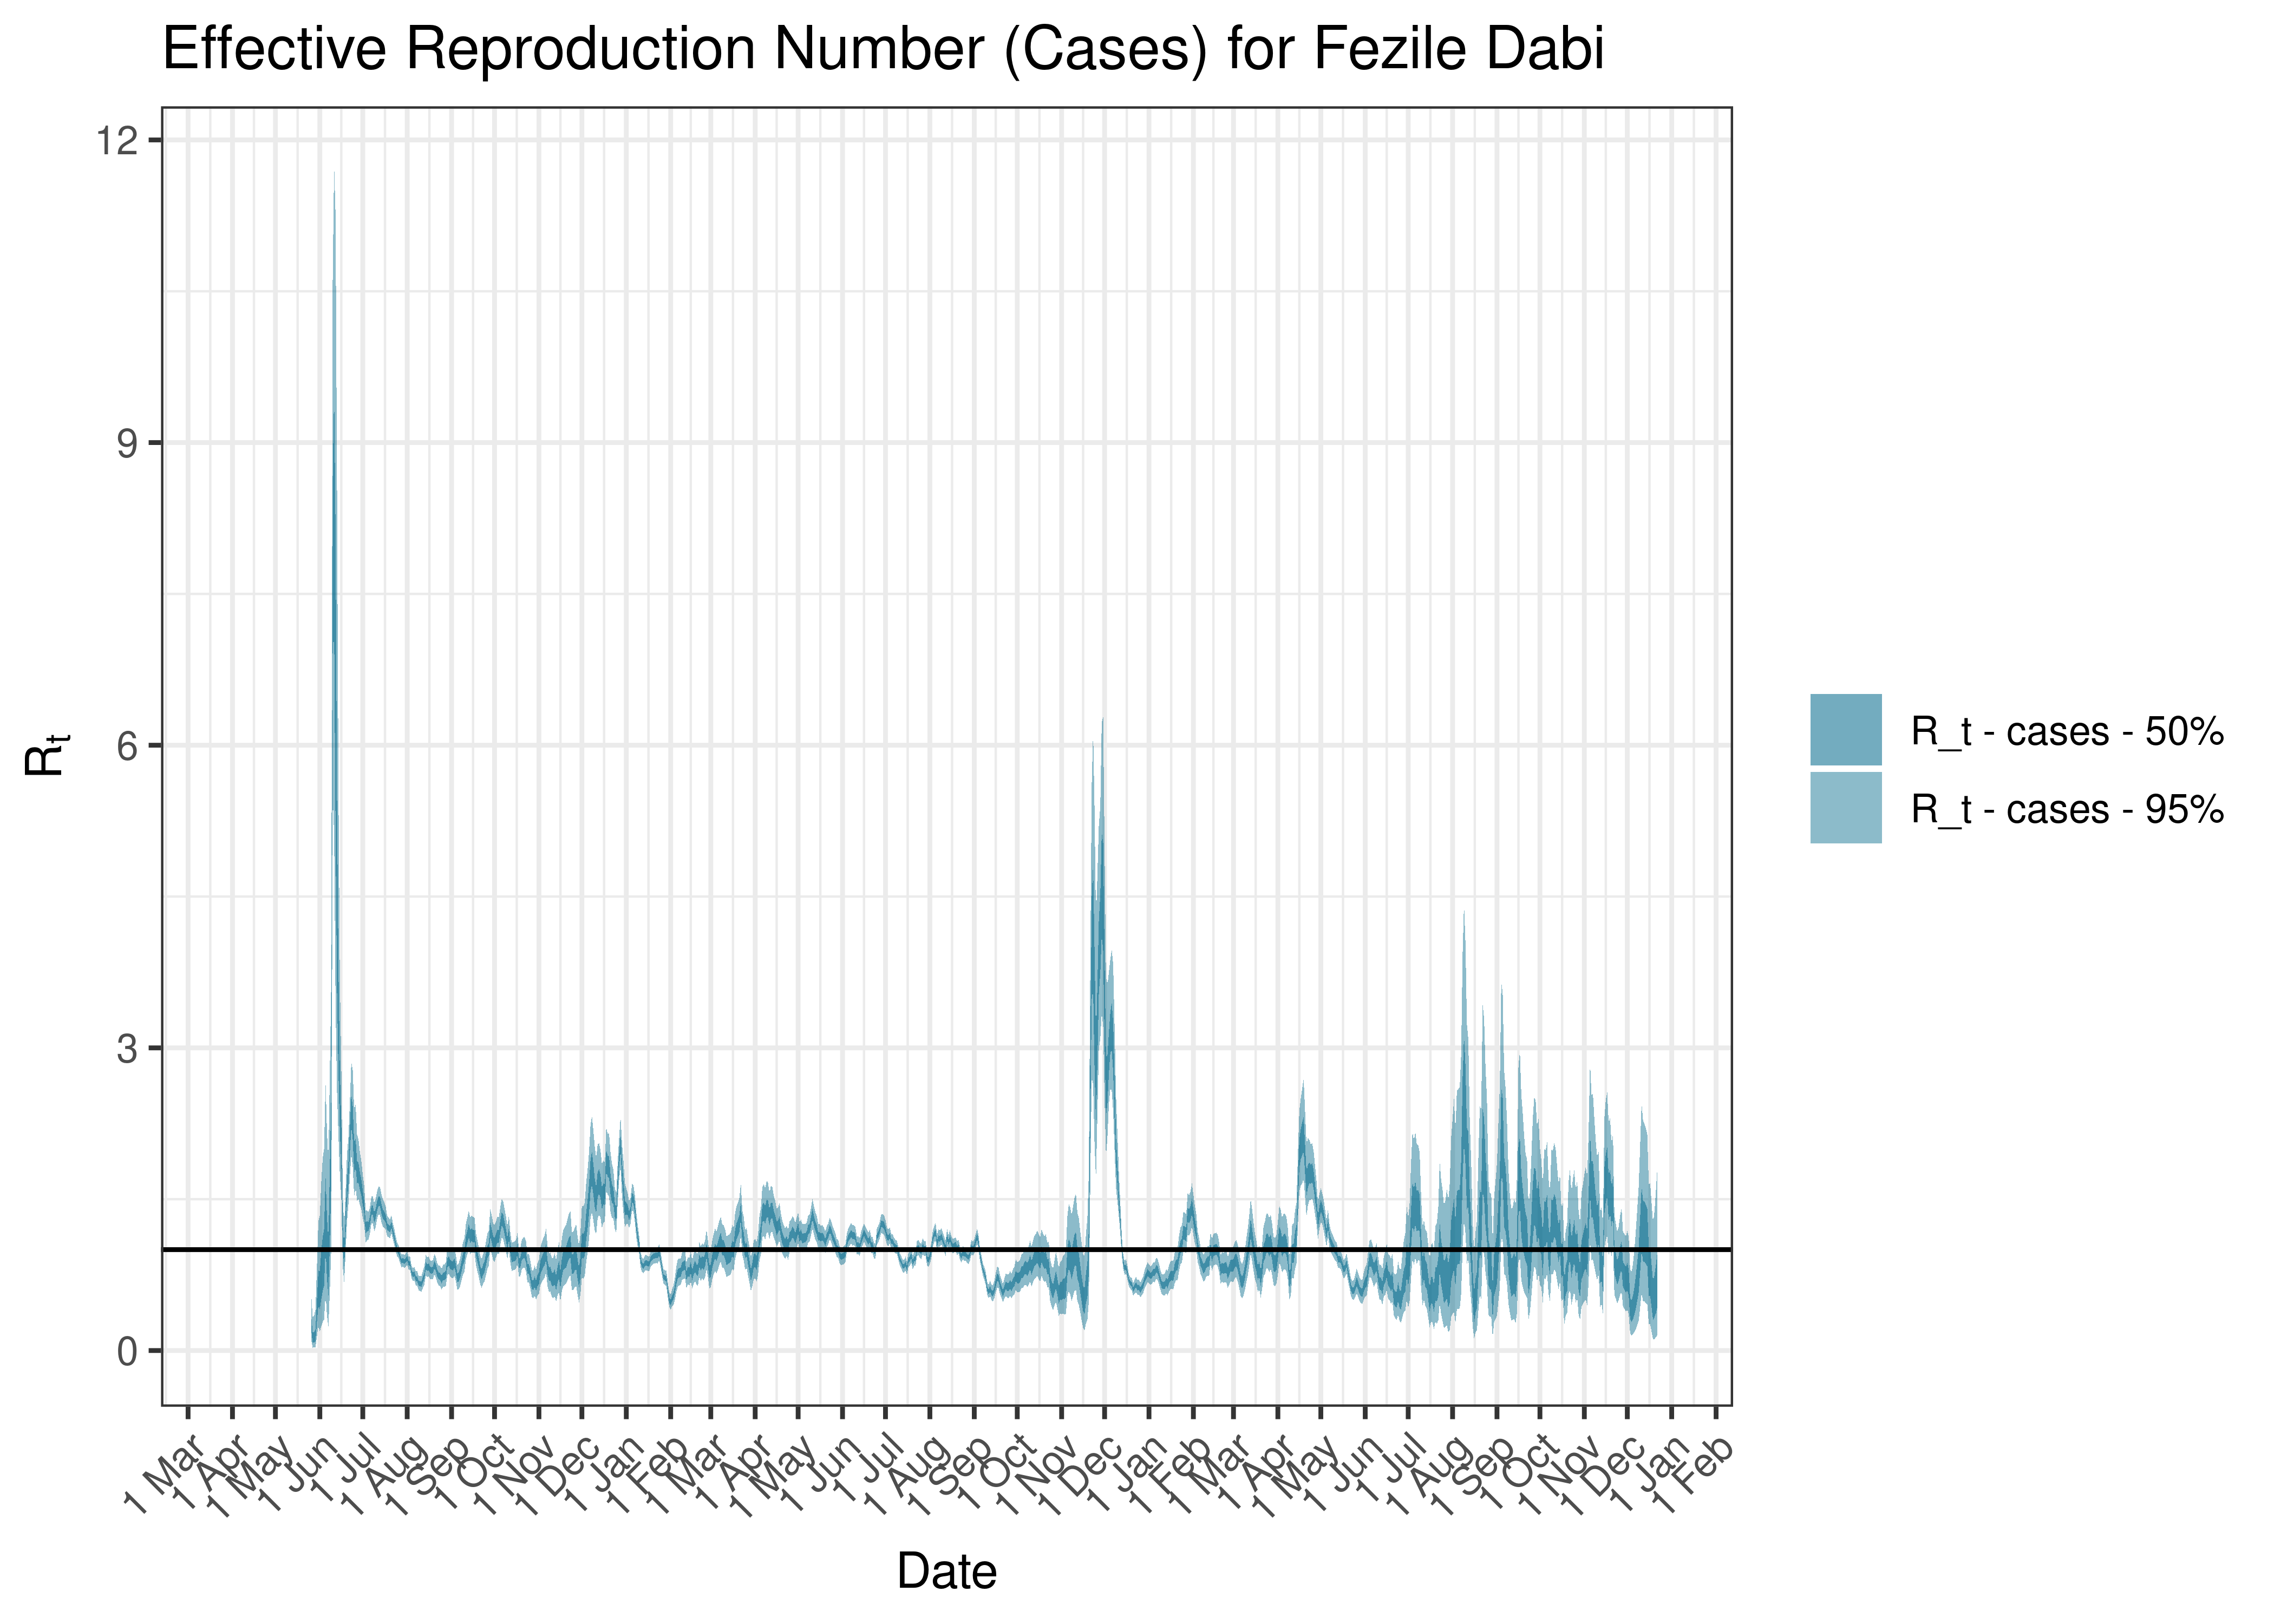 Estimated Effective Reproduction Number Based on Cases for Fezile Dabi since 1 April 2020